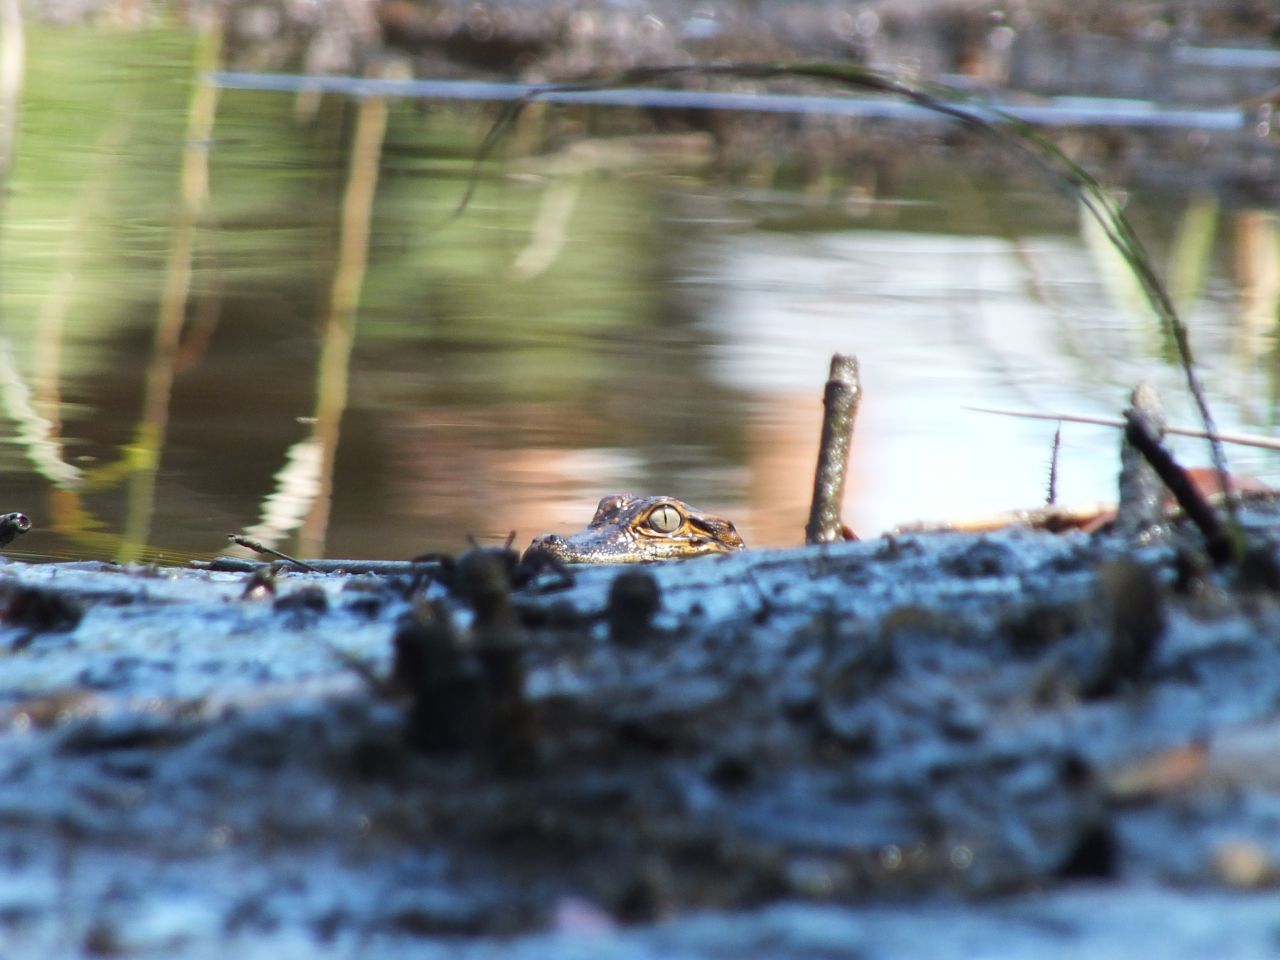 A baby alligator peers out from the <a href="http://ireport.cnn.com/docs/DOC-1138741">Davis Bayou</a> in Mississippi. "Taking pictures of wildlife by kayak allows you to approach the shot in ways you just can't when on foot," says photographer Mark Caputo.